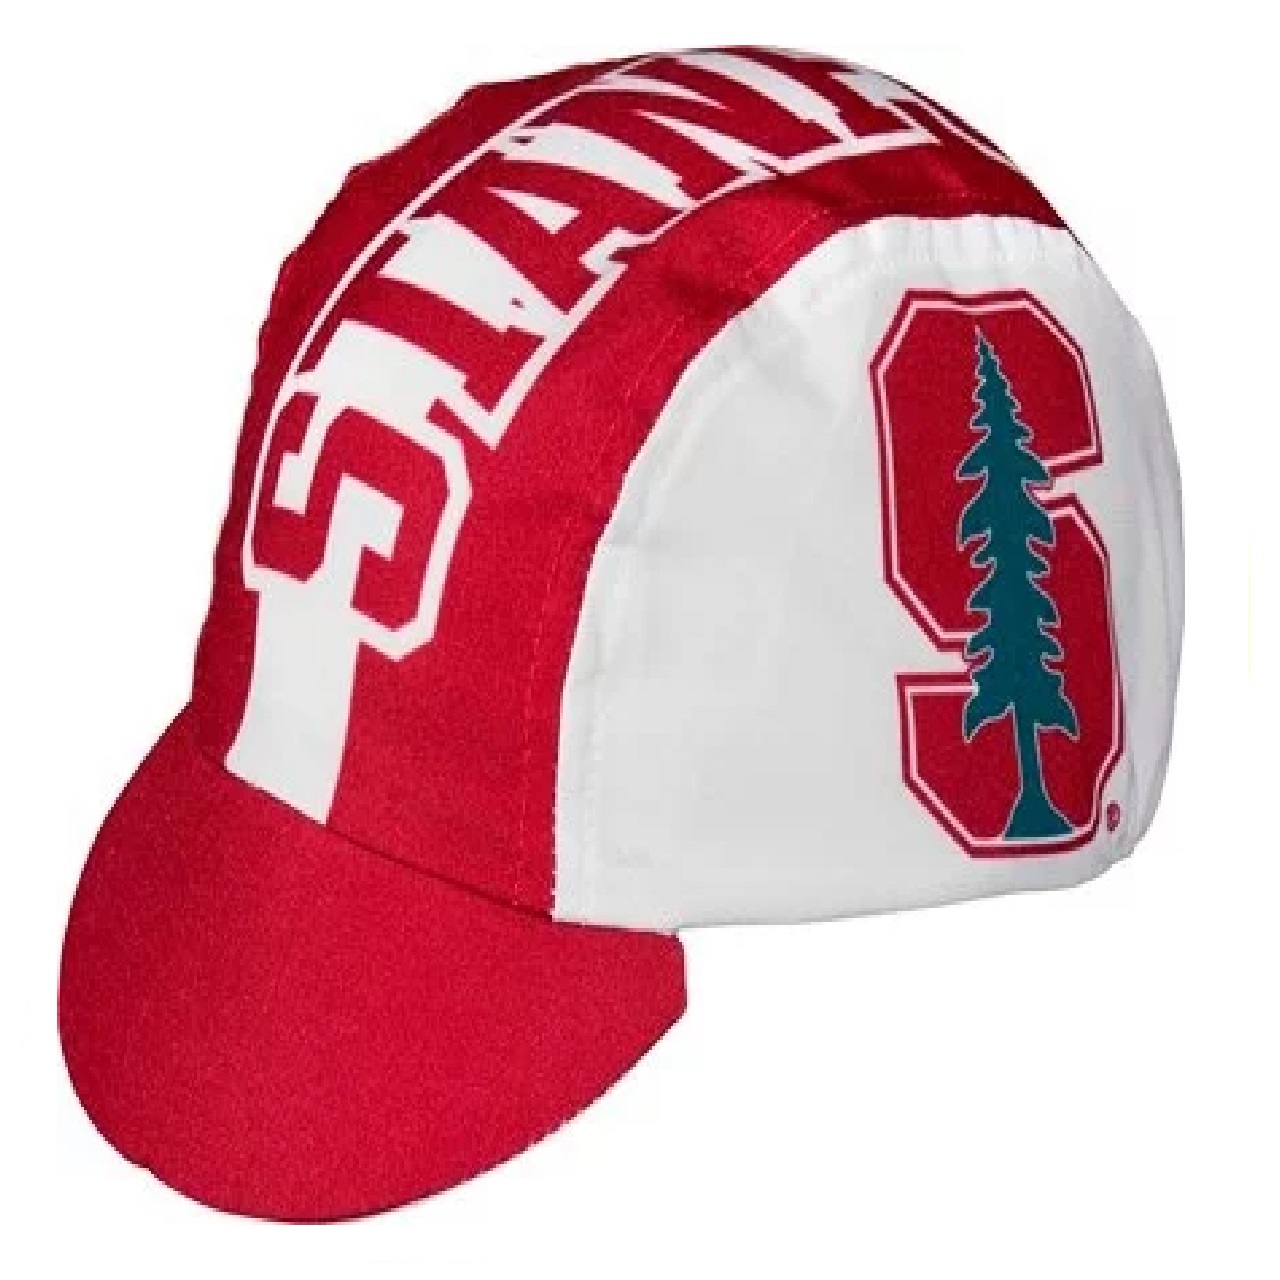 Adrenaline Promotions Stanford University Cycling Cap